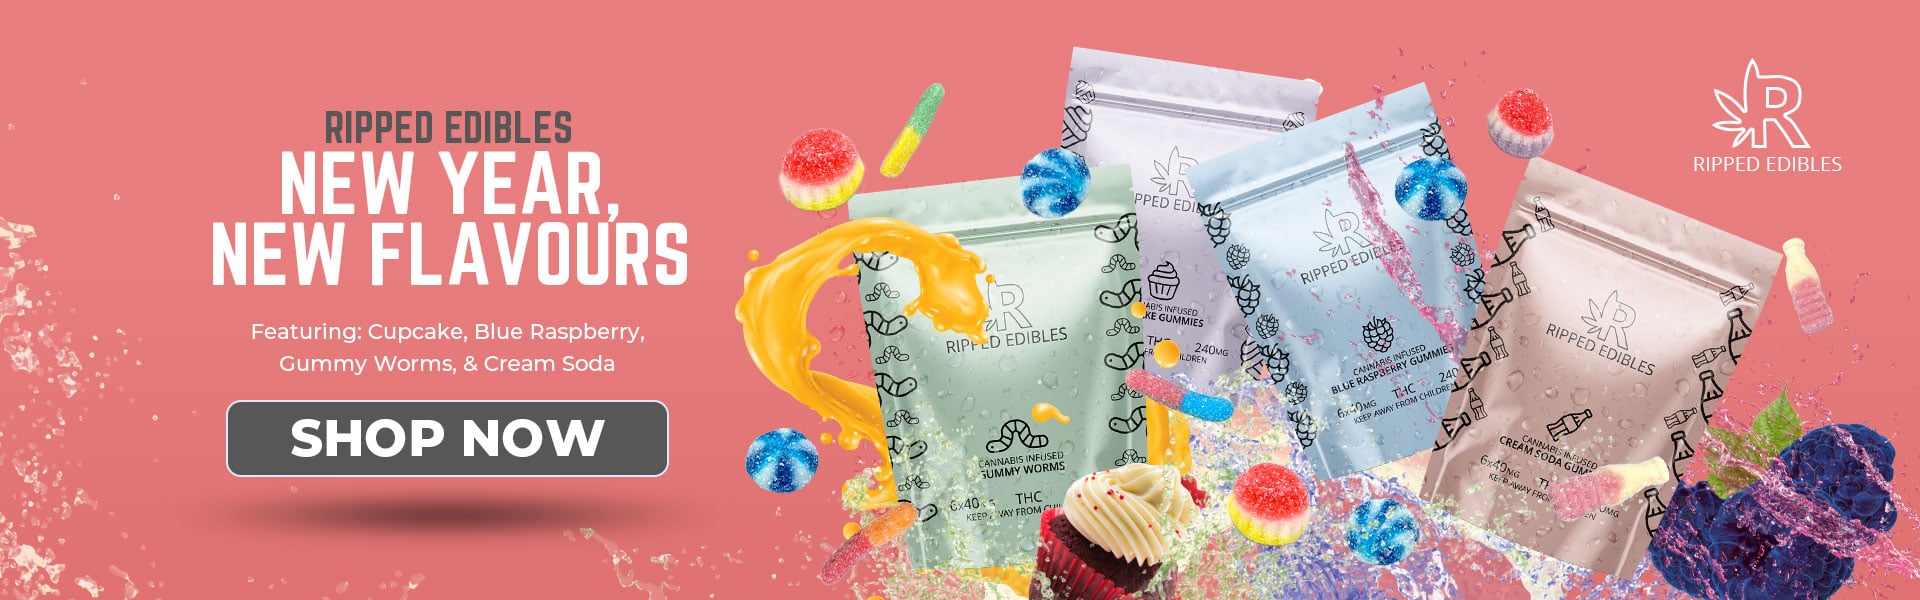 Ripped edibles new flavours 1920x600 1